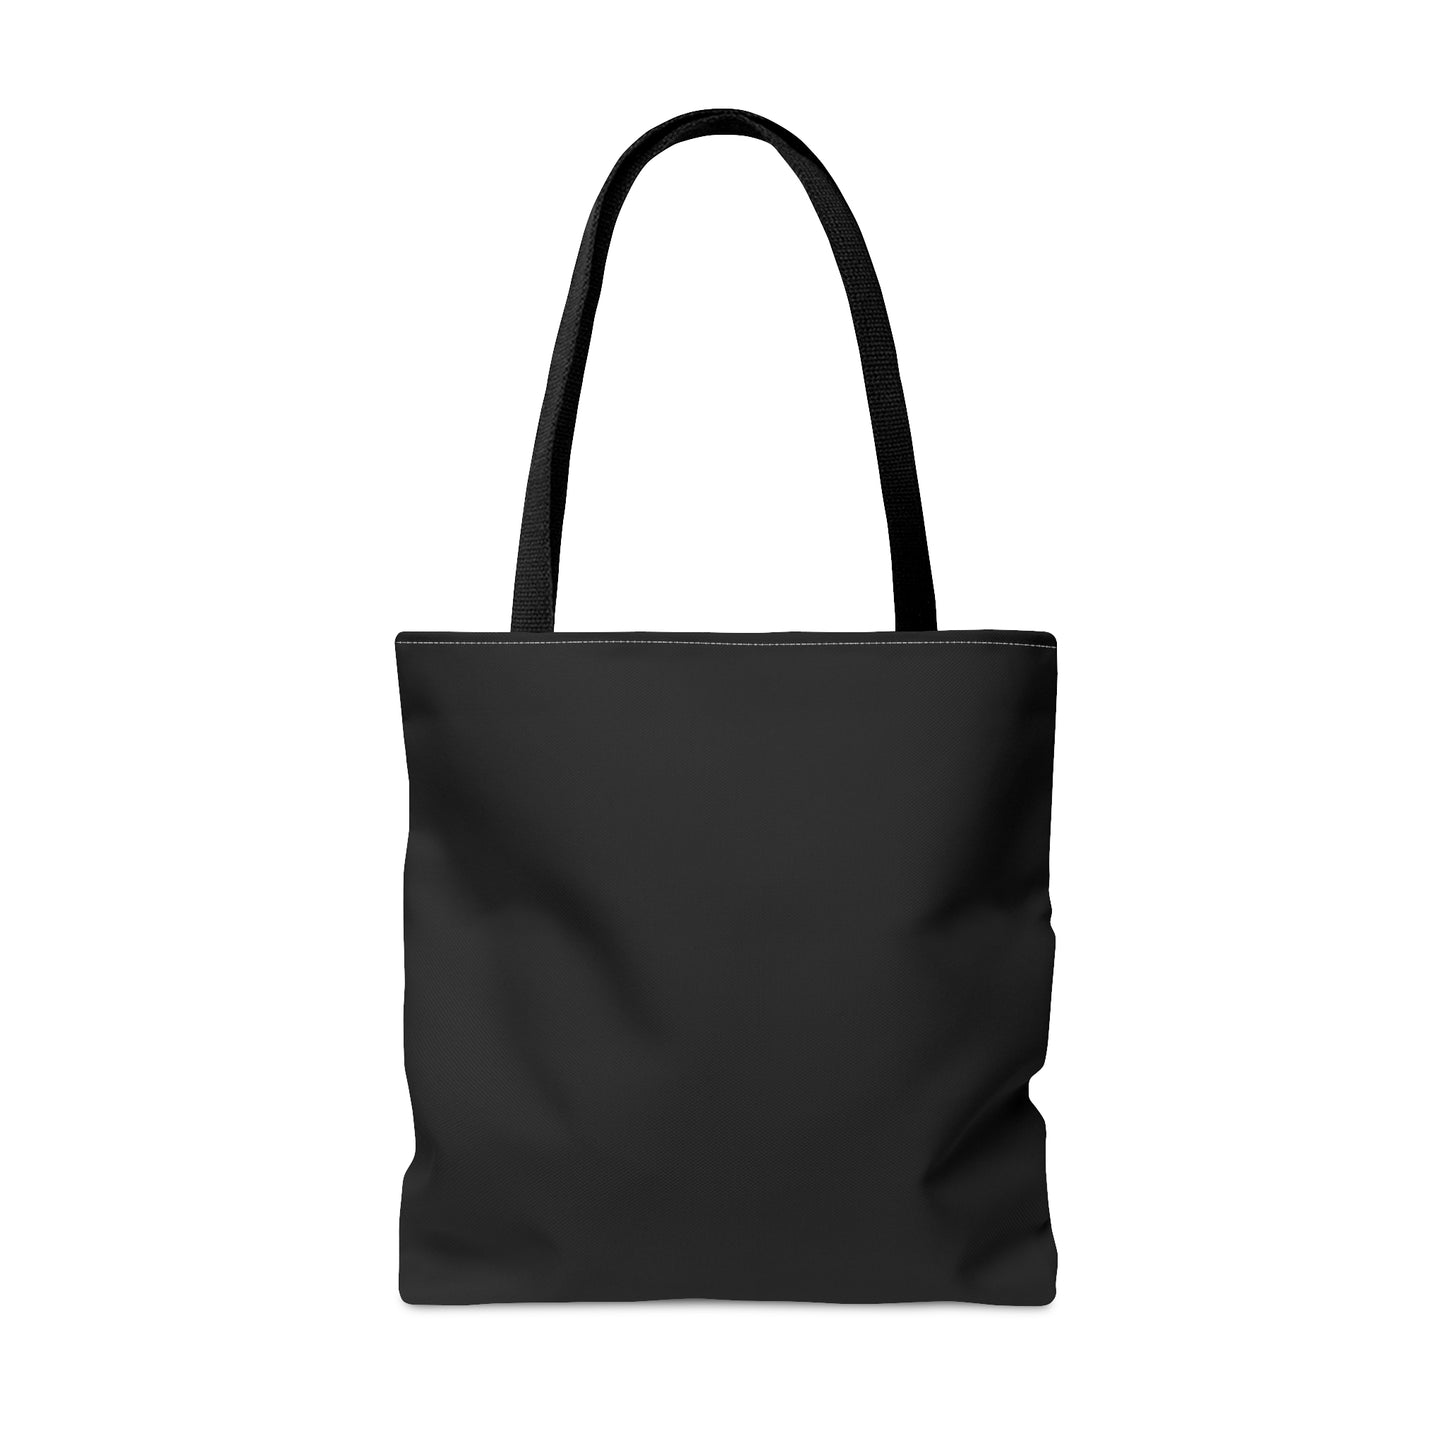 Oversized Winter Reading Vibes Tote Bag